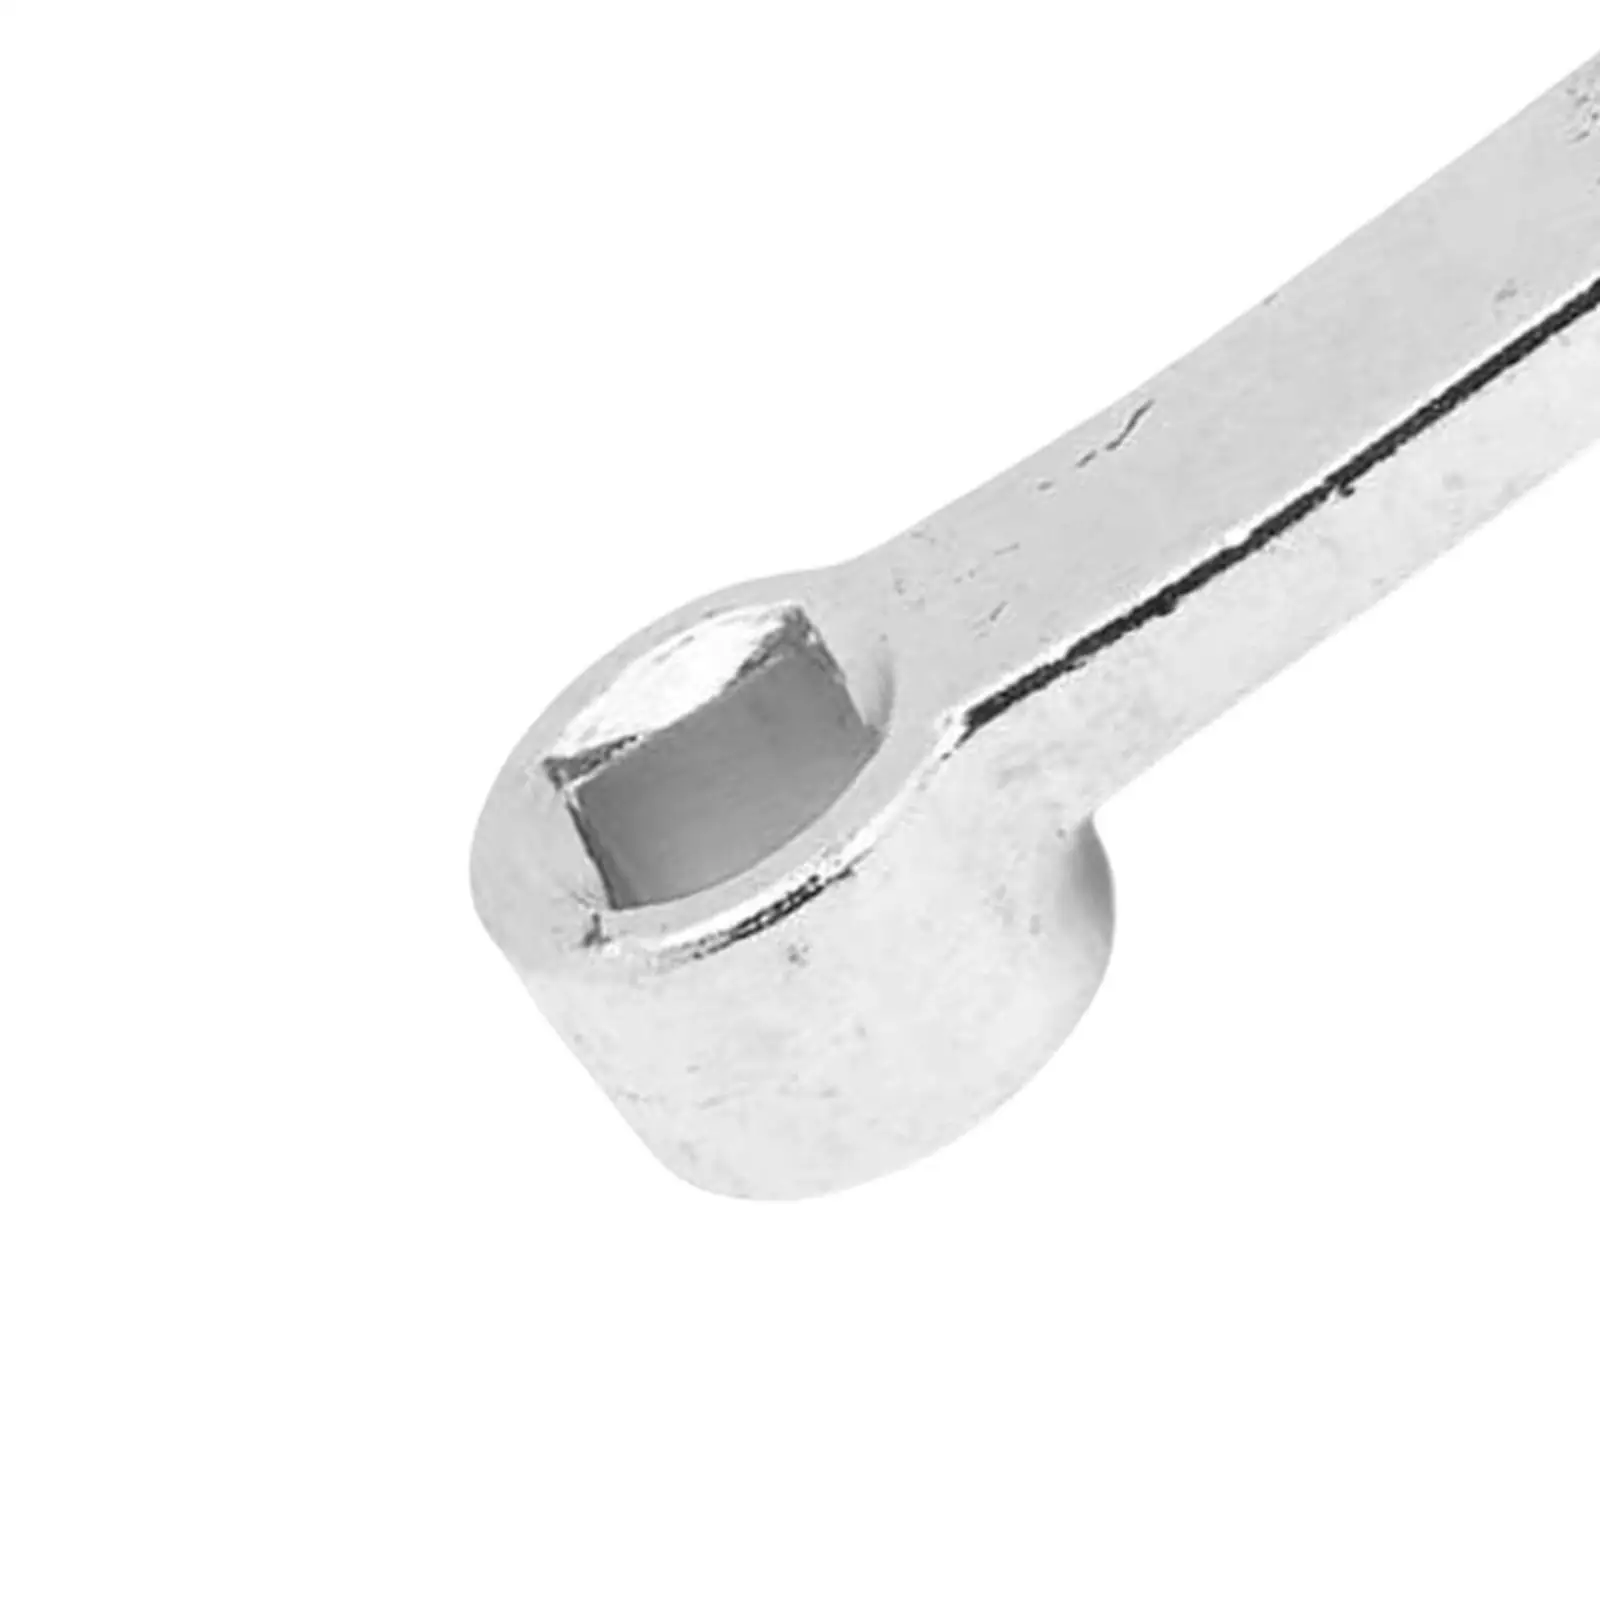 Camber Adjusting Wrench T10179 Portable Rear Axle Camber Adjustment Wrench